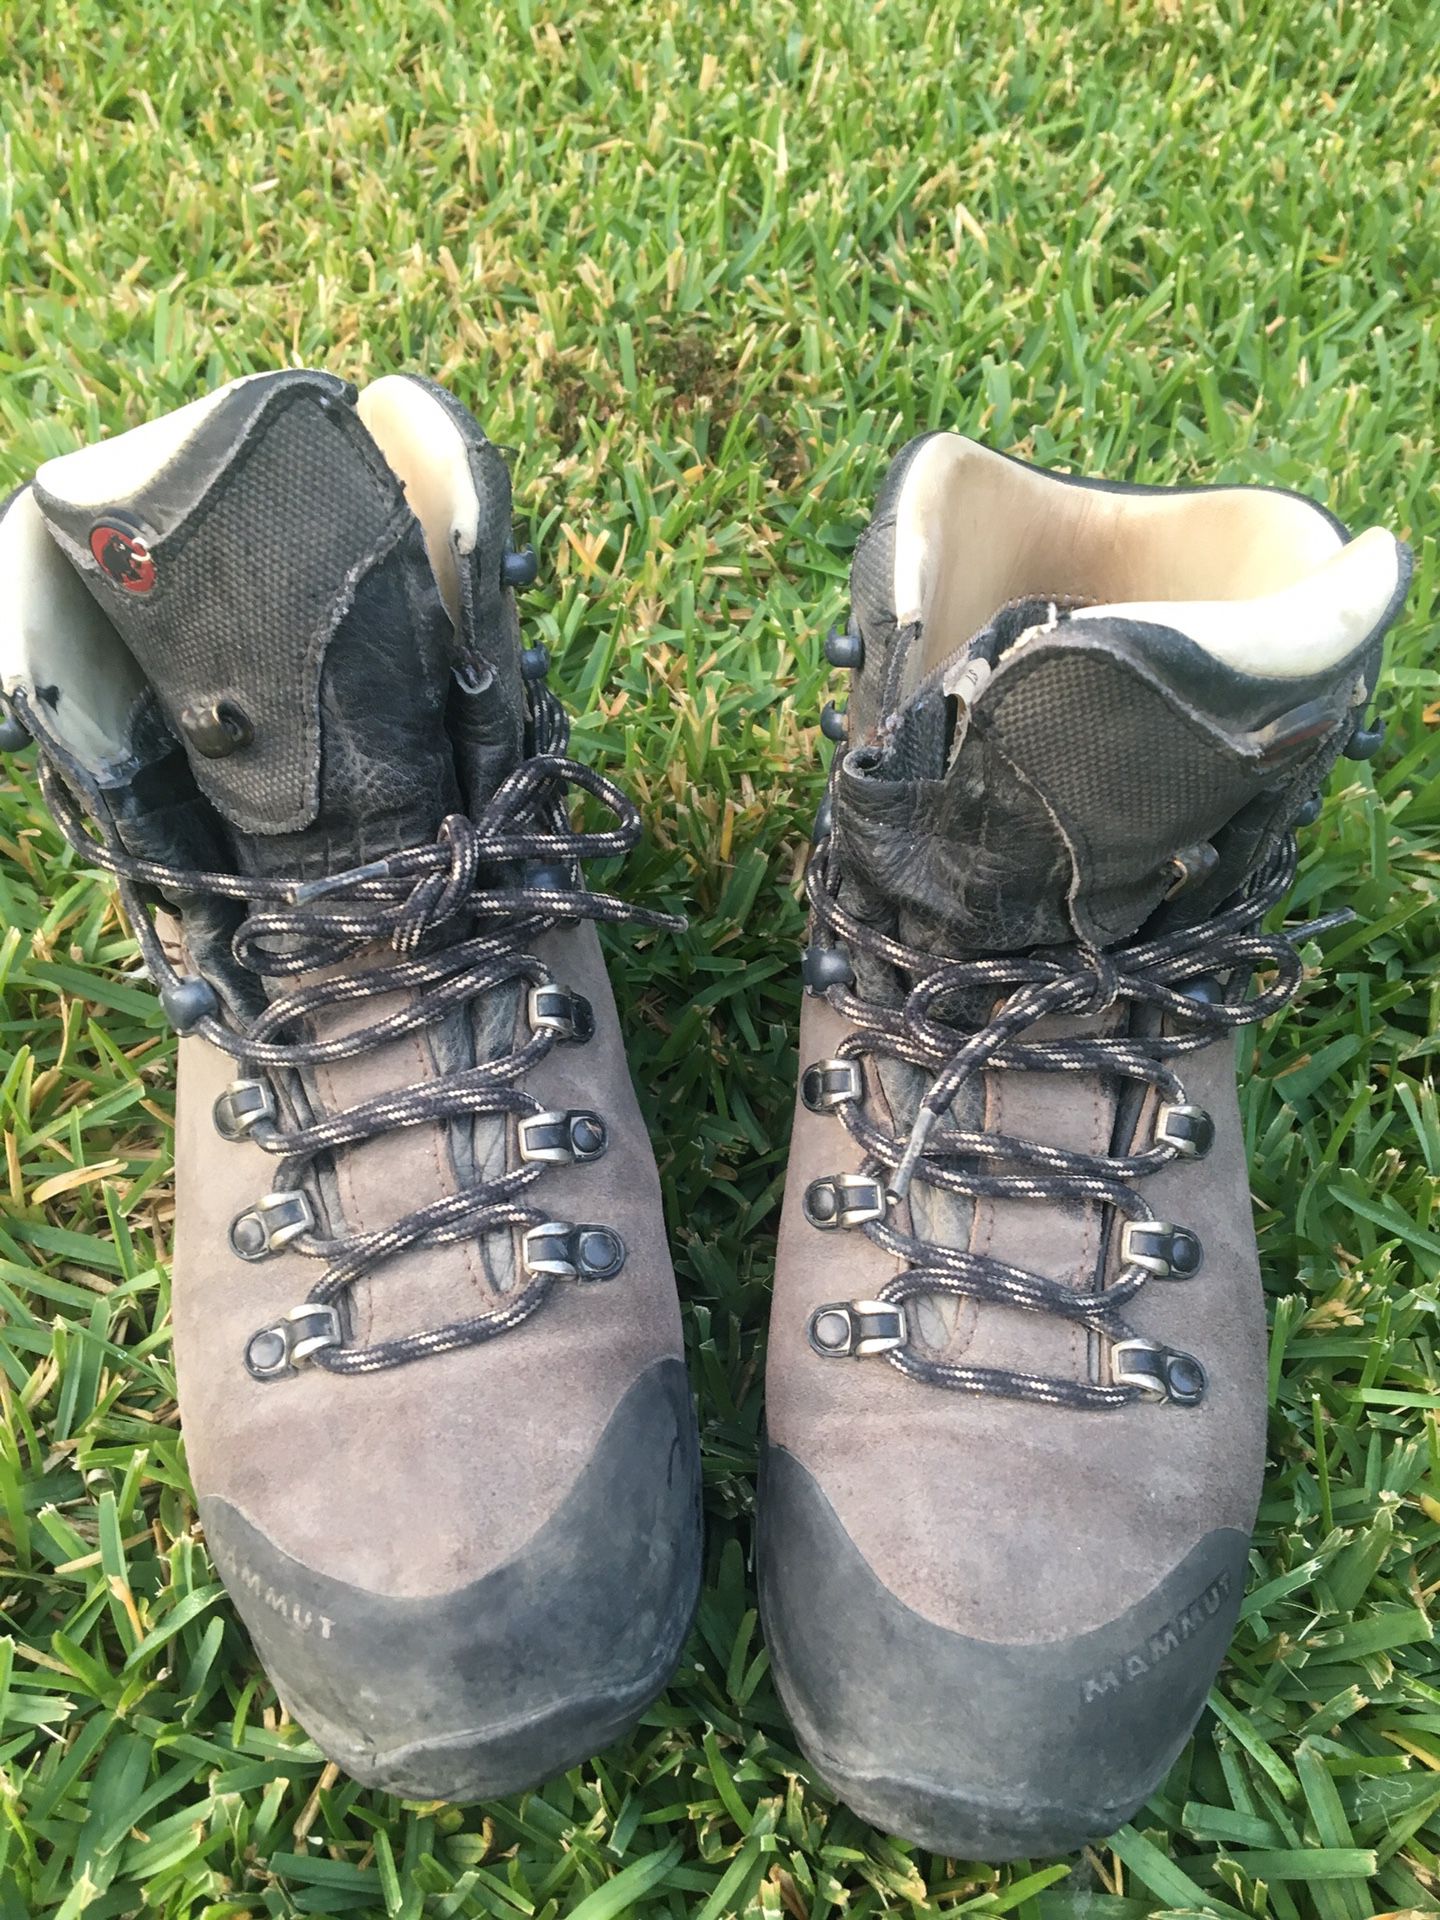 Water Proof, High Ankle backpacking/Hiking Boots